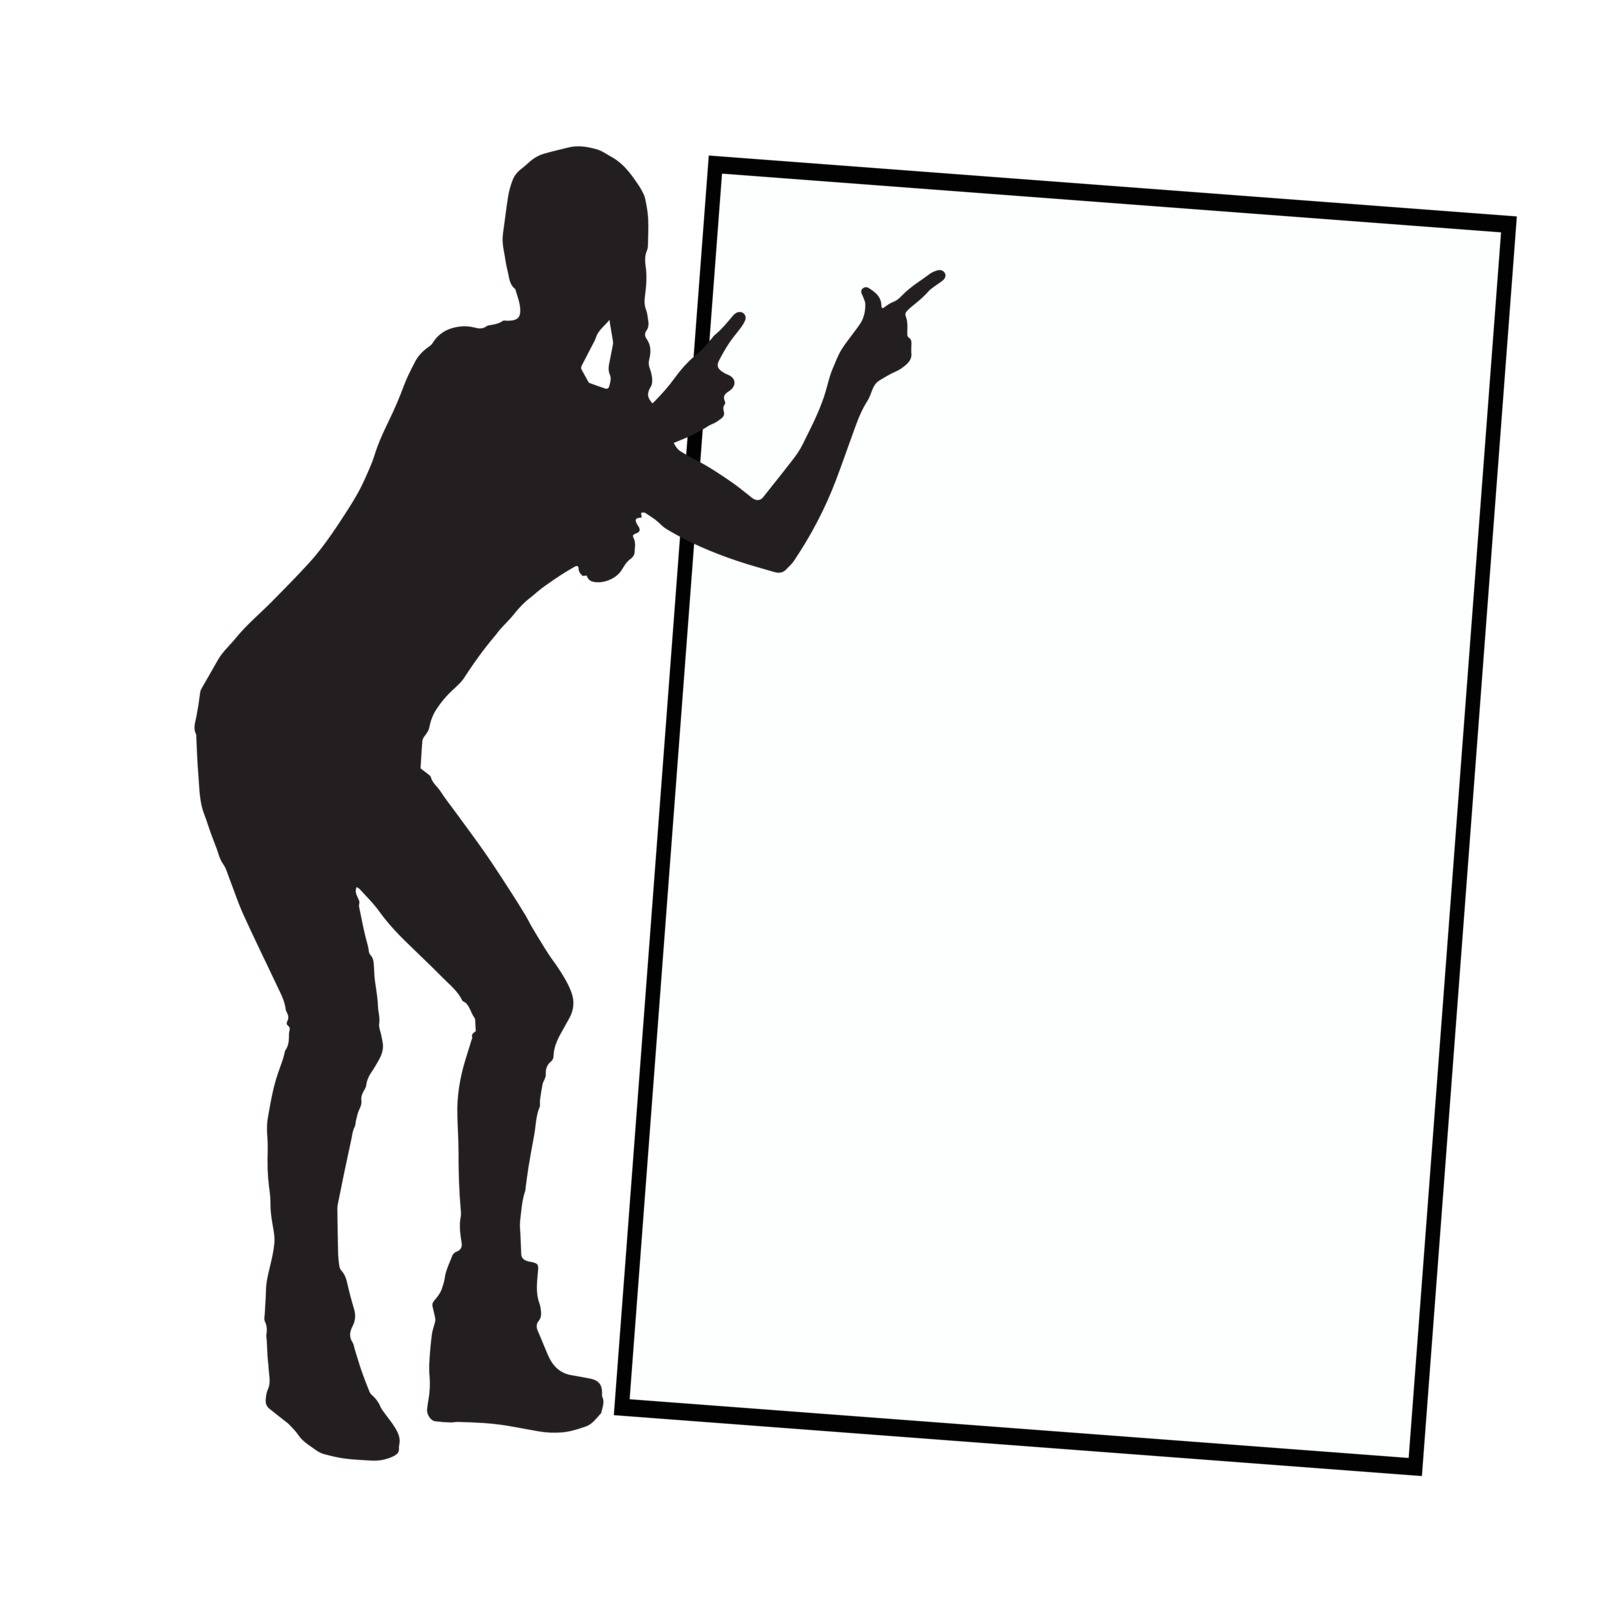 A frame with a place under the text monochrome. Girl on a white background with a silhouette frame indicates. Illustration, vector for your design